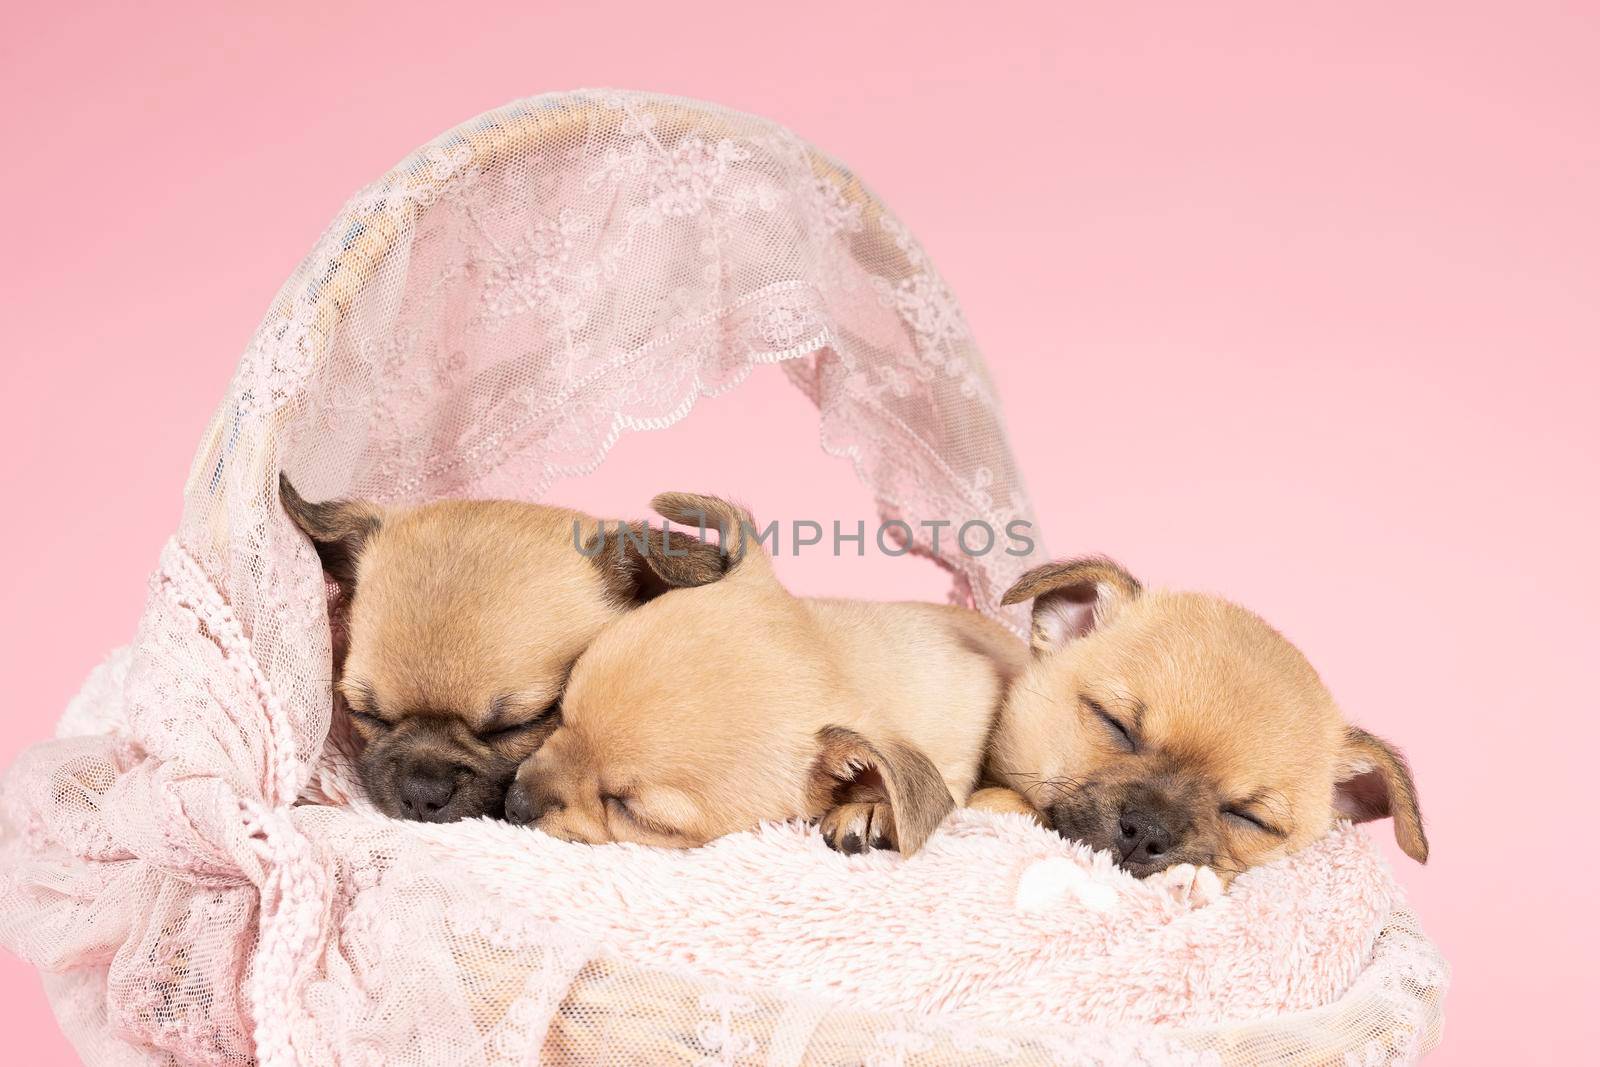 Three cute little Chihuahua puppies sleeping on a pink fur in a pink lace basket with a pink background by LeoniekvanderVliet